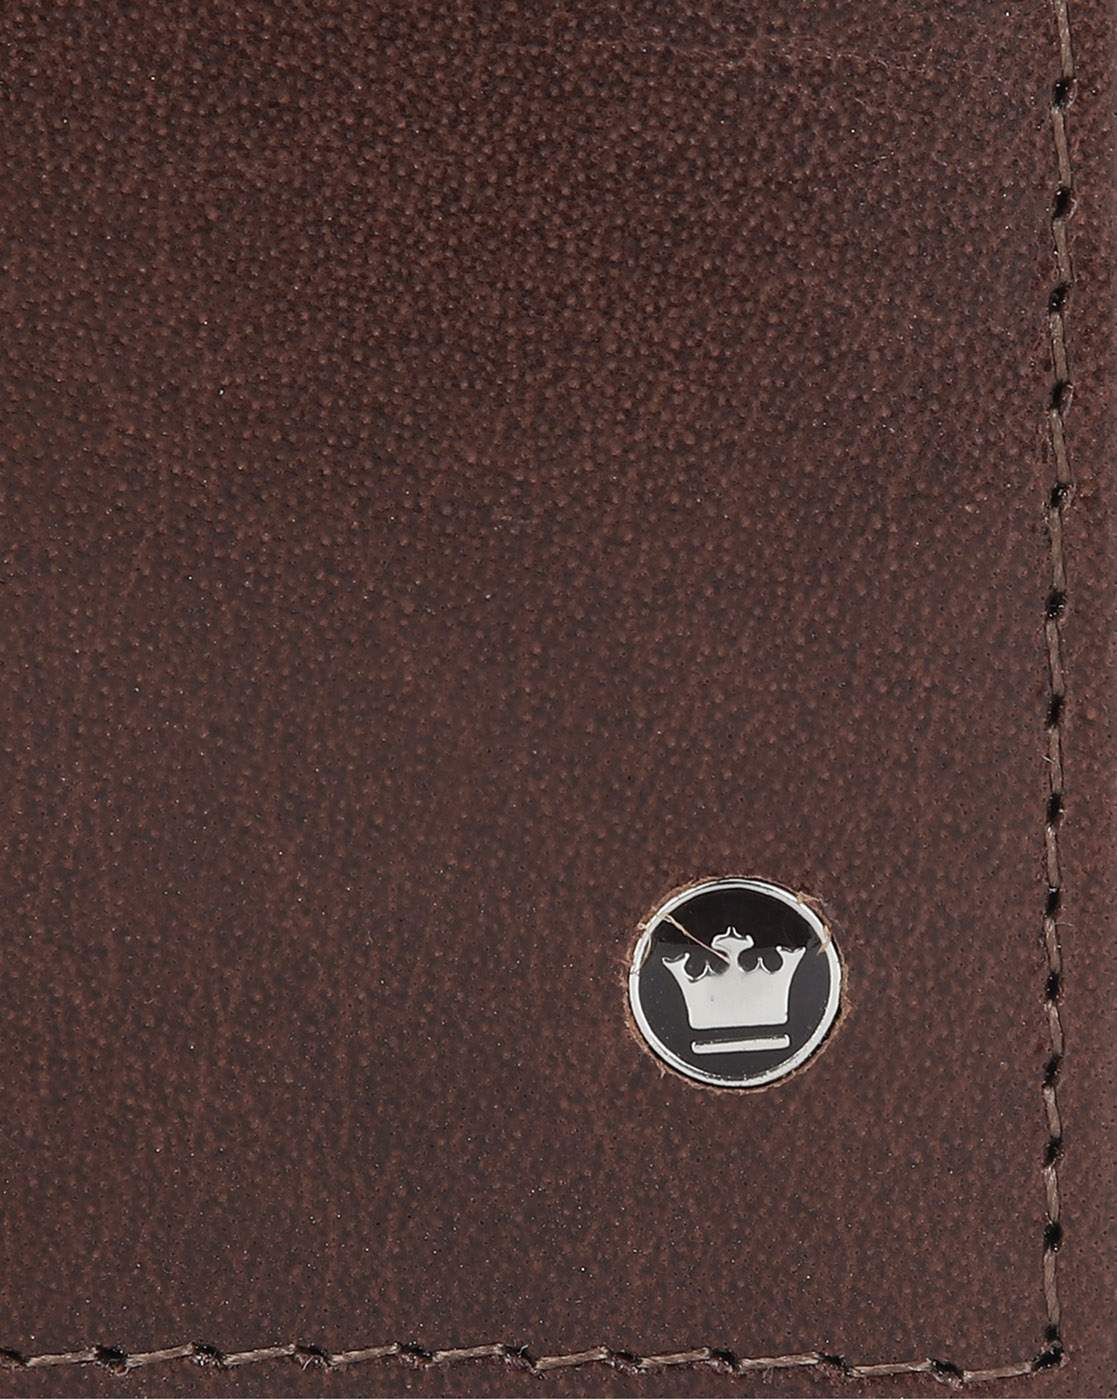 Buy Louis Philippe Brown Casual Leather Bi-Fold Wallet for Men Online At  Best Price @ Tata CLiQ